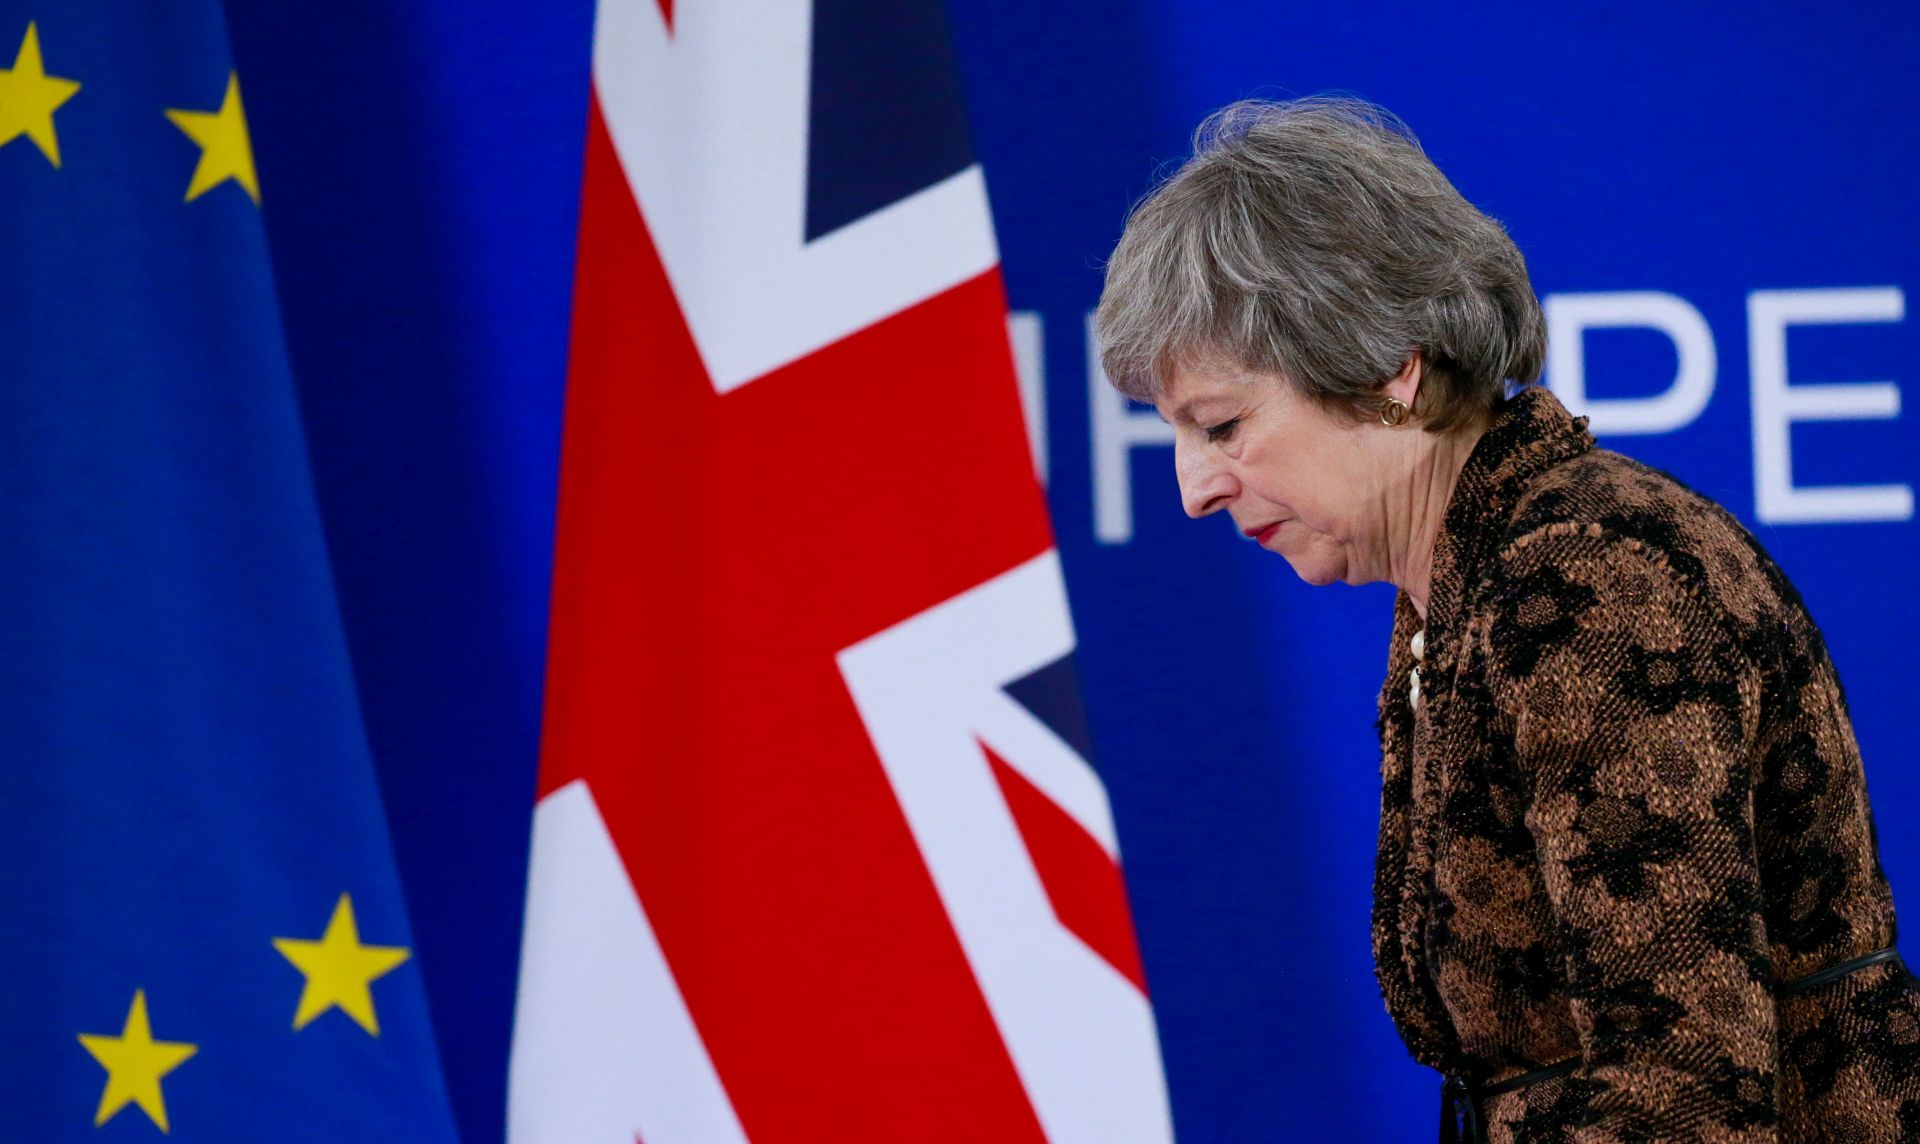 epa07623622 (FILE) - British Prime Minister Theresa May walks off after a news conference at the end of the summit of EU leader in Brussels, Belgium, 14 December 2018 (reissued 06 June 2019). British Prime Minister Theresa May will resign from office on 07 June 2019, a position she assumed on 13 July 2016 determined to 'deliver Brexit'. In order to achieve that - as 'Brexit means Brexit' - and to strengthen her Conservatives party majority in parliament, snap elections were held but resulted in a coalition with the Northern Ireland's Democratic Unionist Party (DUP). May has failed multiple times to ratify her Withdrawal Agreement, the Brexit deal with the European Union in Parliament, since. The United Kingdom was officially due to leave the European Union (EU) on 29 March 2019 after the British government invoked the EU's Article 50 on 29 March 2017 to start the process dubbed 'Brexit'. A narrow majority of the British people on 23 June 2016 voted in a referendum that the United Kingdom shall leave the European Union. In a recent interview May stated her 'great regret' over not having been able to deliver Brexit.  EPA/STEPHANIE LECOCQ  ATTENTION: This Image is part of a PHOTO SET *** Local Caption *** 54842233